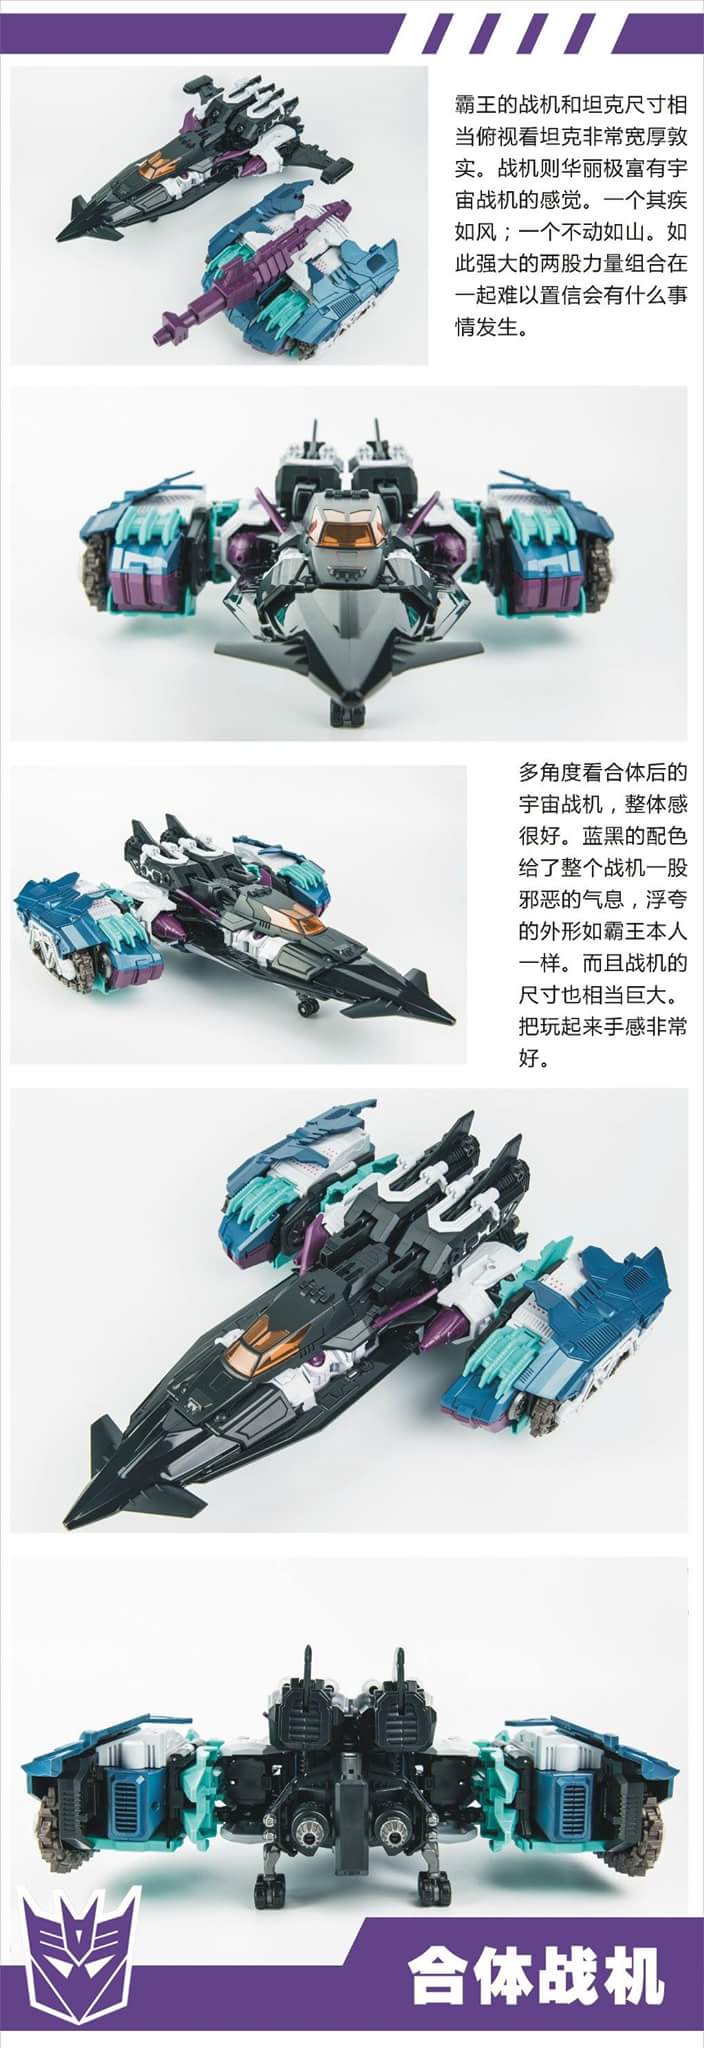 [Mastermind Creations] Produit Tiers - R-17 Carnifex - aka Overlord (TF Masterforce) - Page 3 79LbmBXb